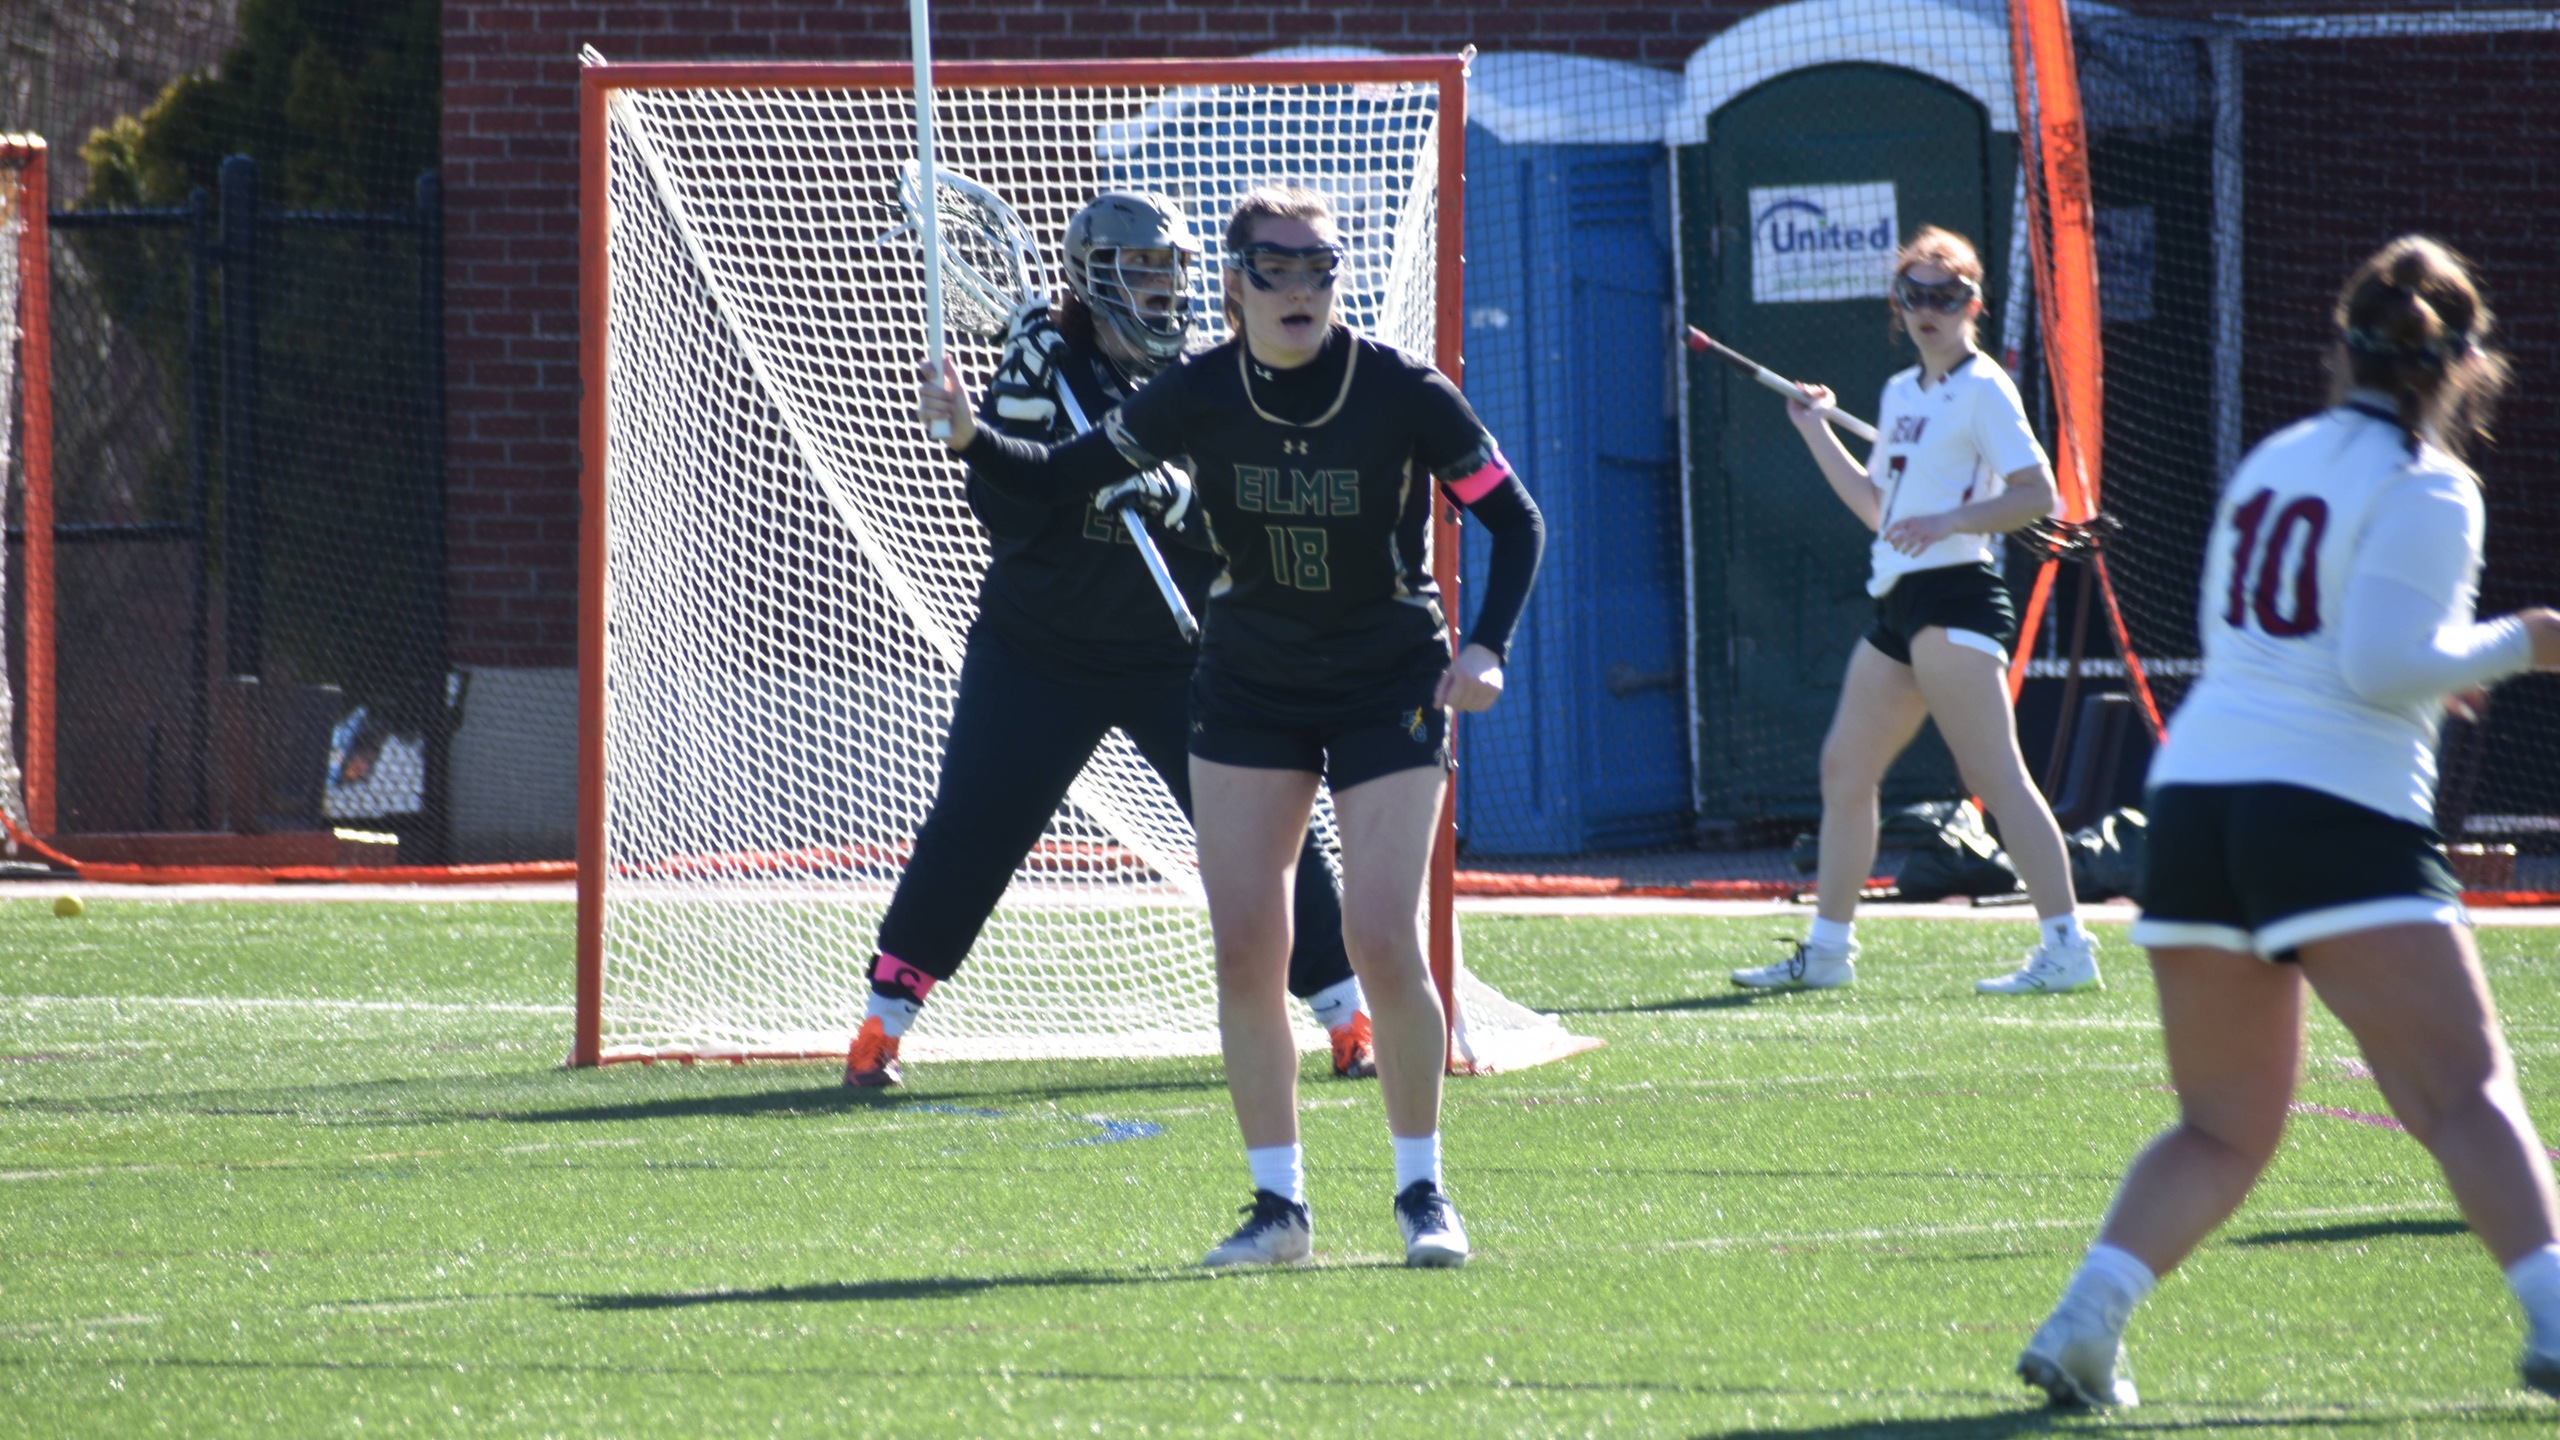 Women’s Lacrosse Loses to Norwich in a Tough Conference Matchup